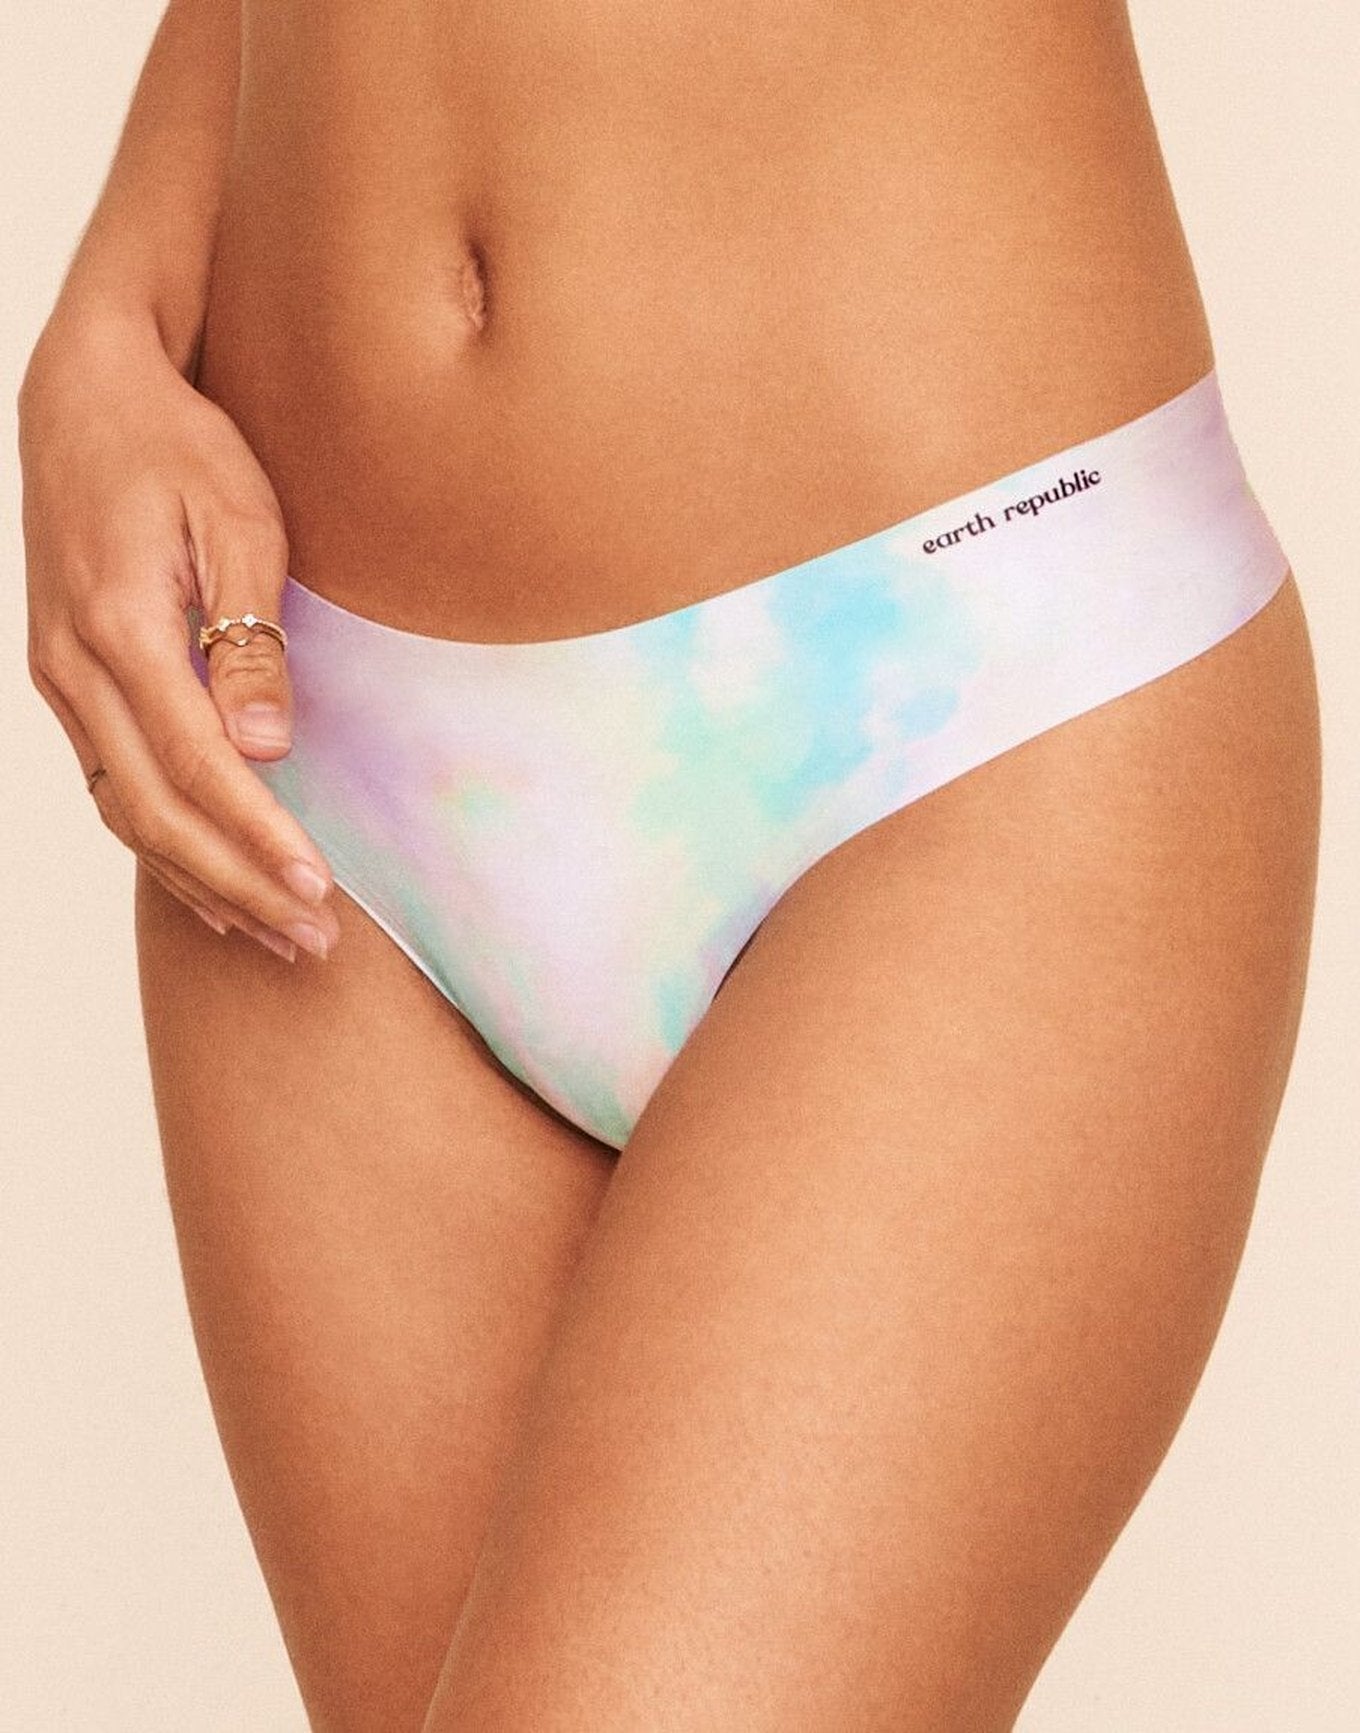 Earth Republic Sage Clean Cut Clean Cut Thong in color Smudged Unicorn and shape thong